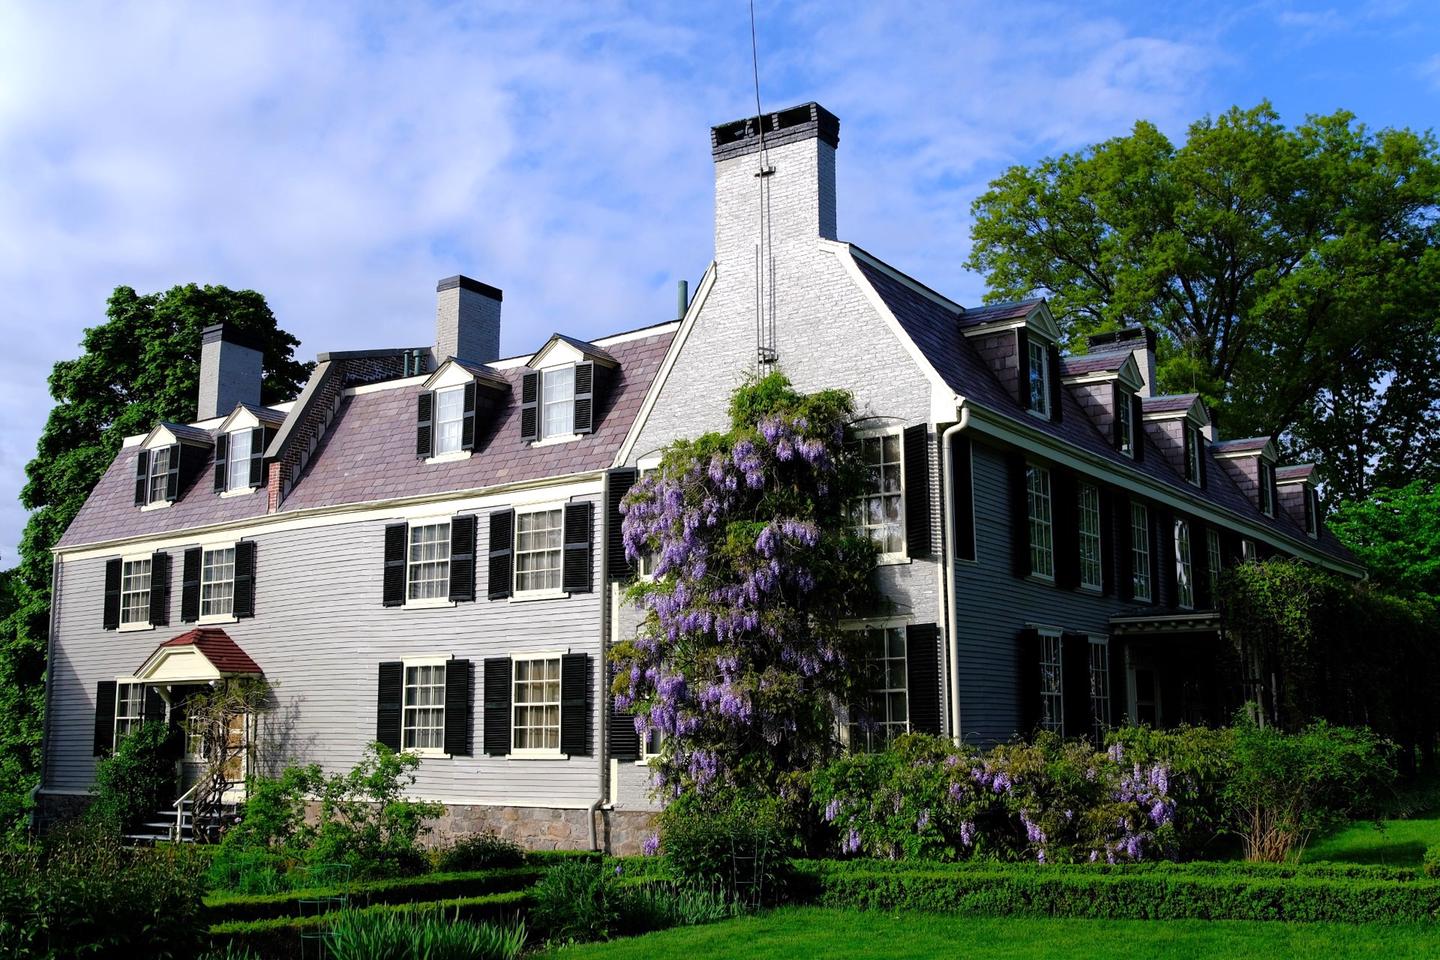 A large building with light gray siding, multiple windows with white trim and black shutters, and 3 chimneys. Blooming purple wisteria flowers grow on a vine up the side of the building. building covered with green vines and next to it a large home with gray siding, white trim, and black shutters. In the foreground is a garden with boxwoods.The Old House at Peace field was the home of four generations of the Adams family. It is part of the 30-minute Old House at Peace field and Stone Library tour.   